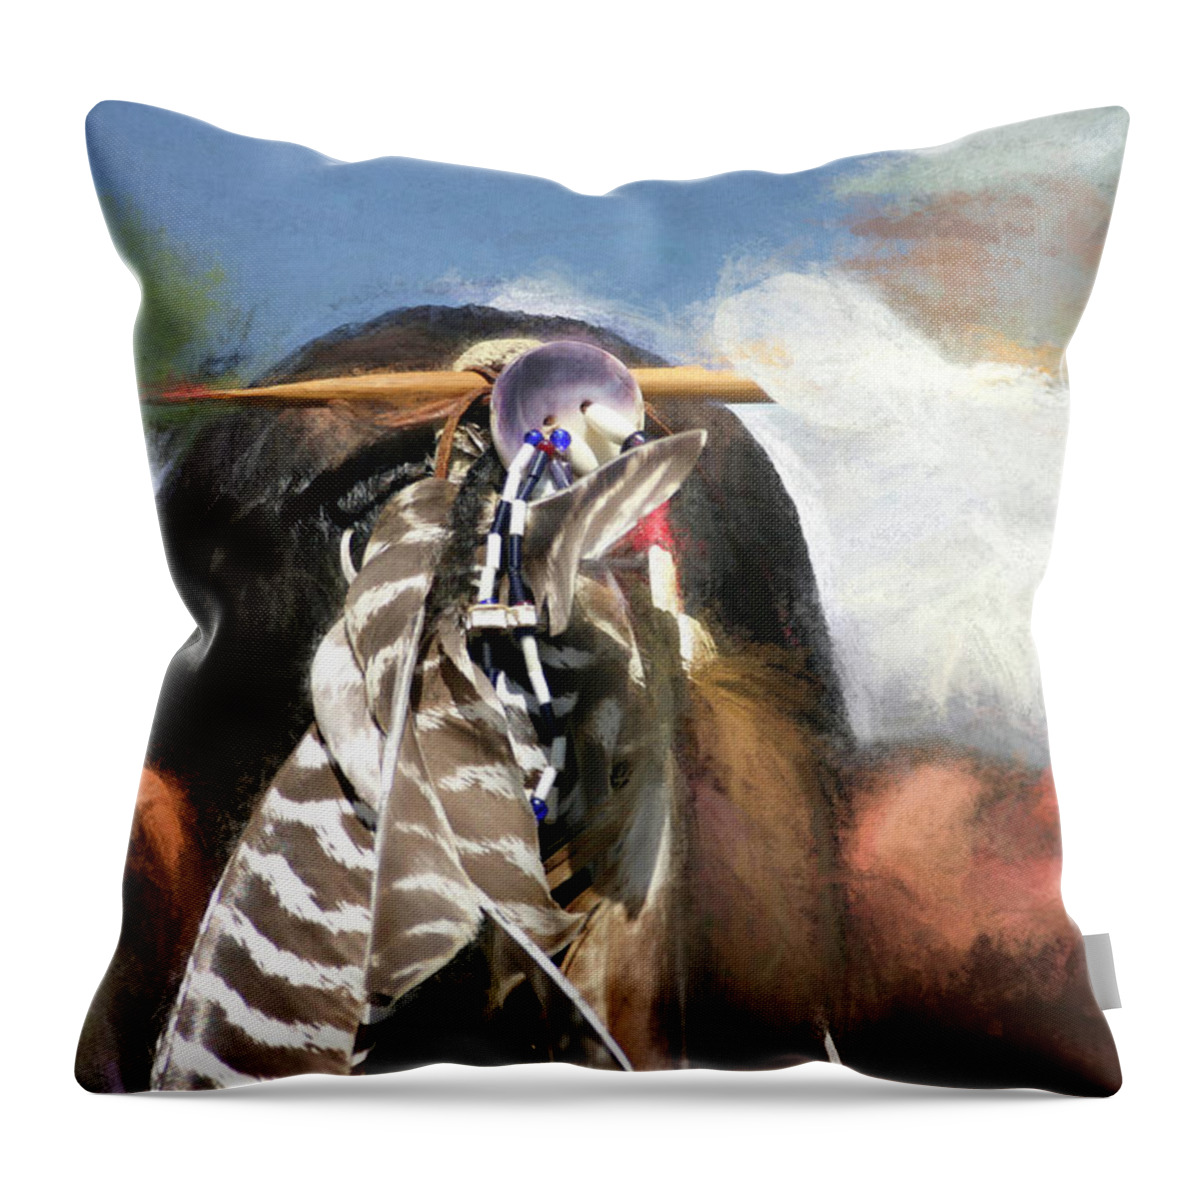 American Throw Pillow featuring the photograph Feathers at a Powwow by Wayne King